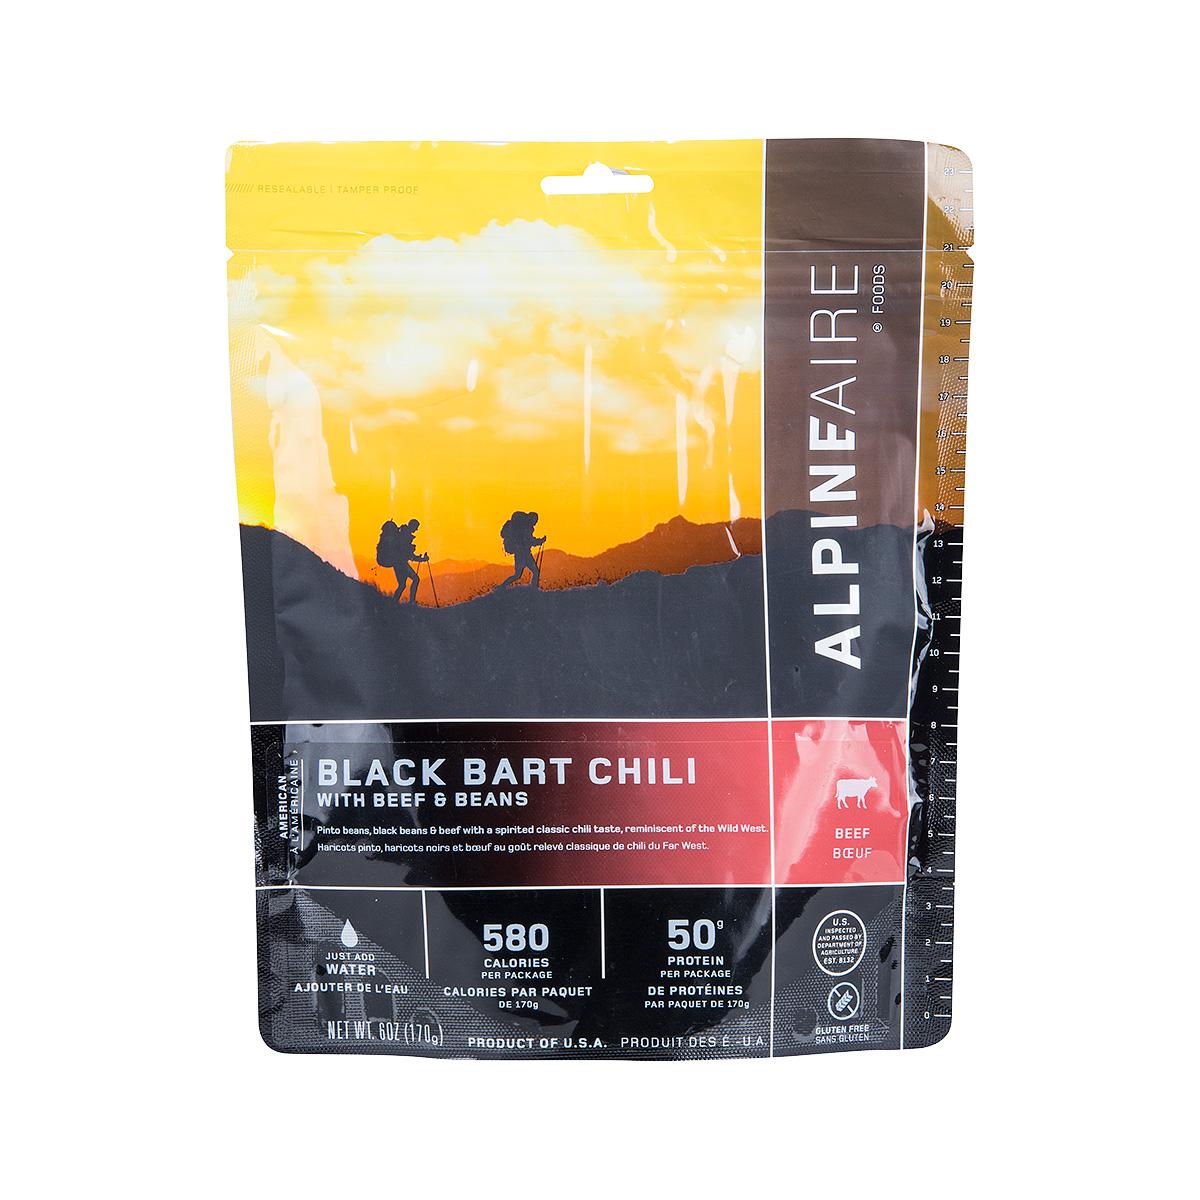  Black Bart Chili With Beef & Beans Instant Meal